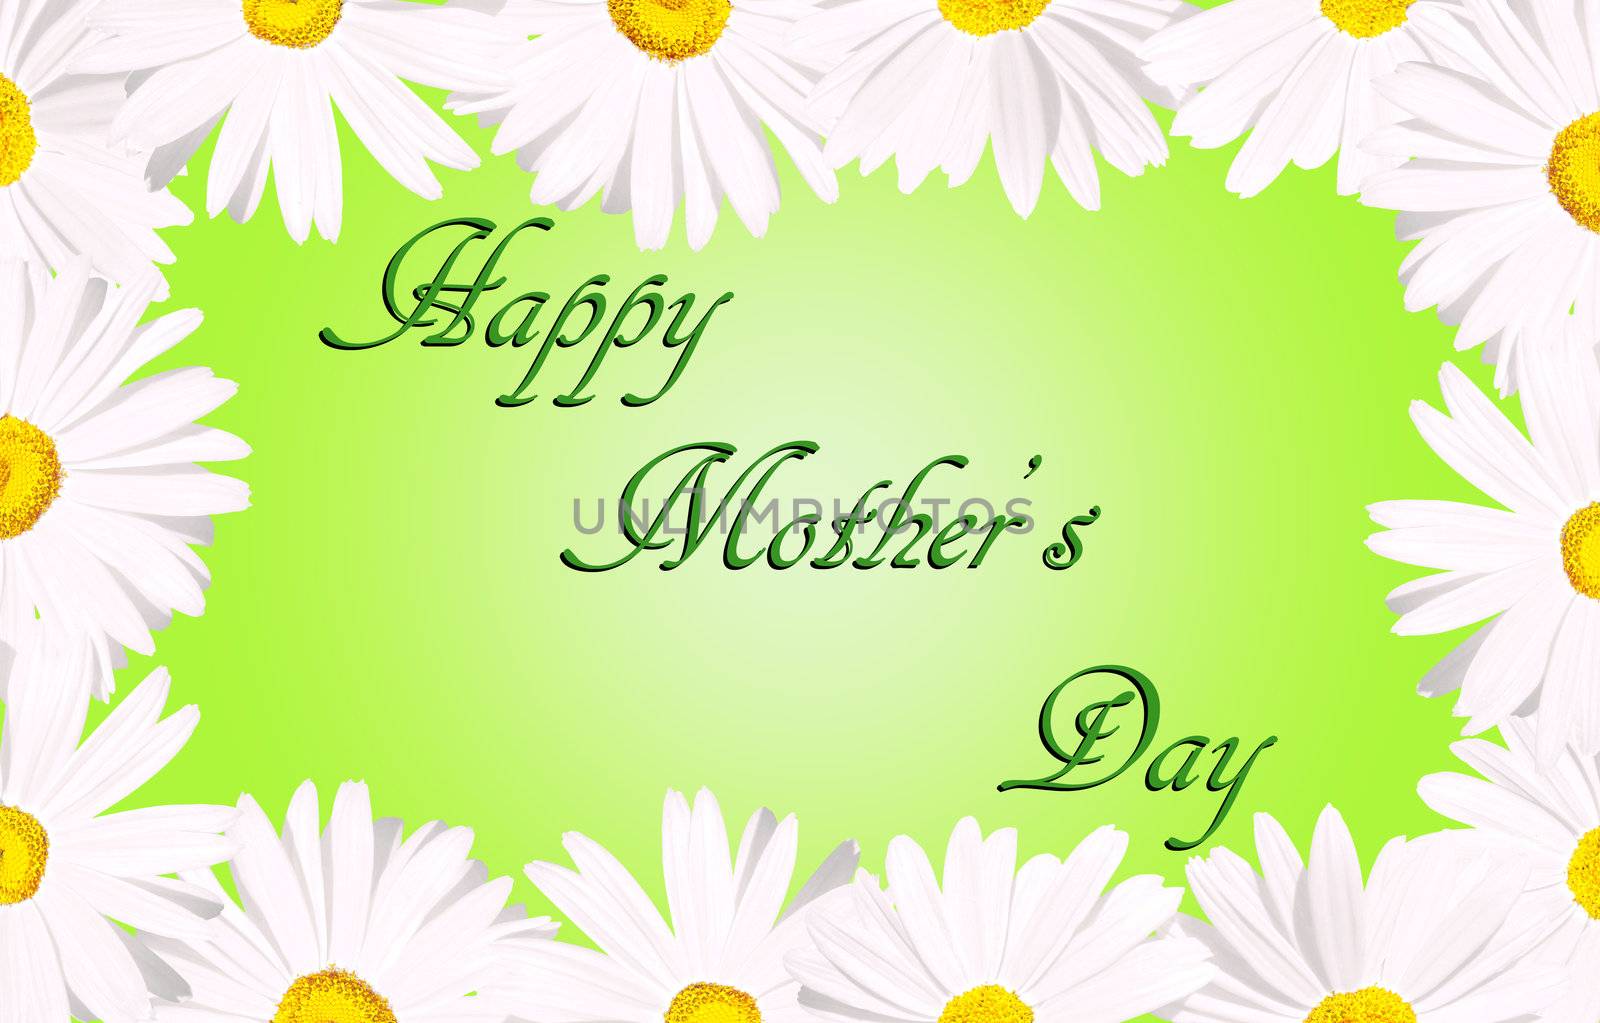 Happy mother's day written in beautiful script with white daisies forming a border over baby green background, perfect card for the occasion.               